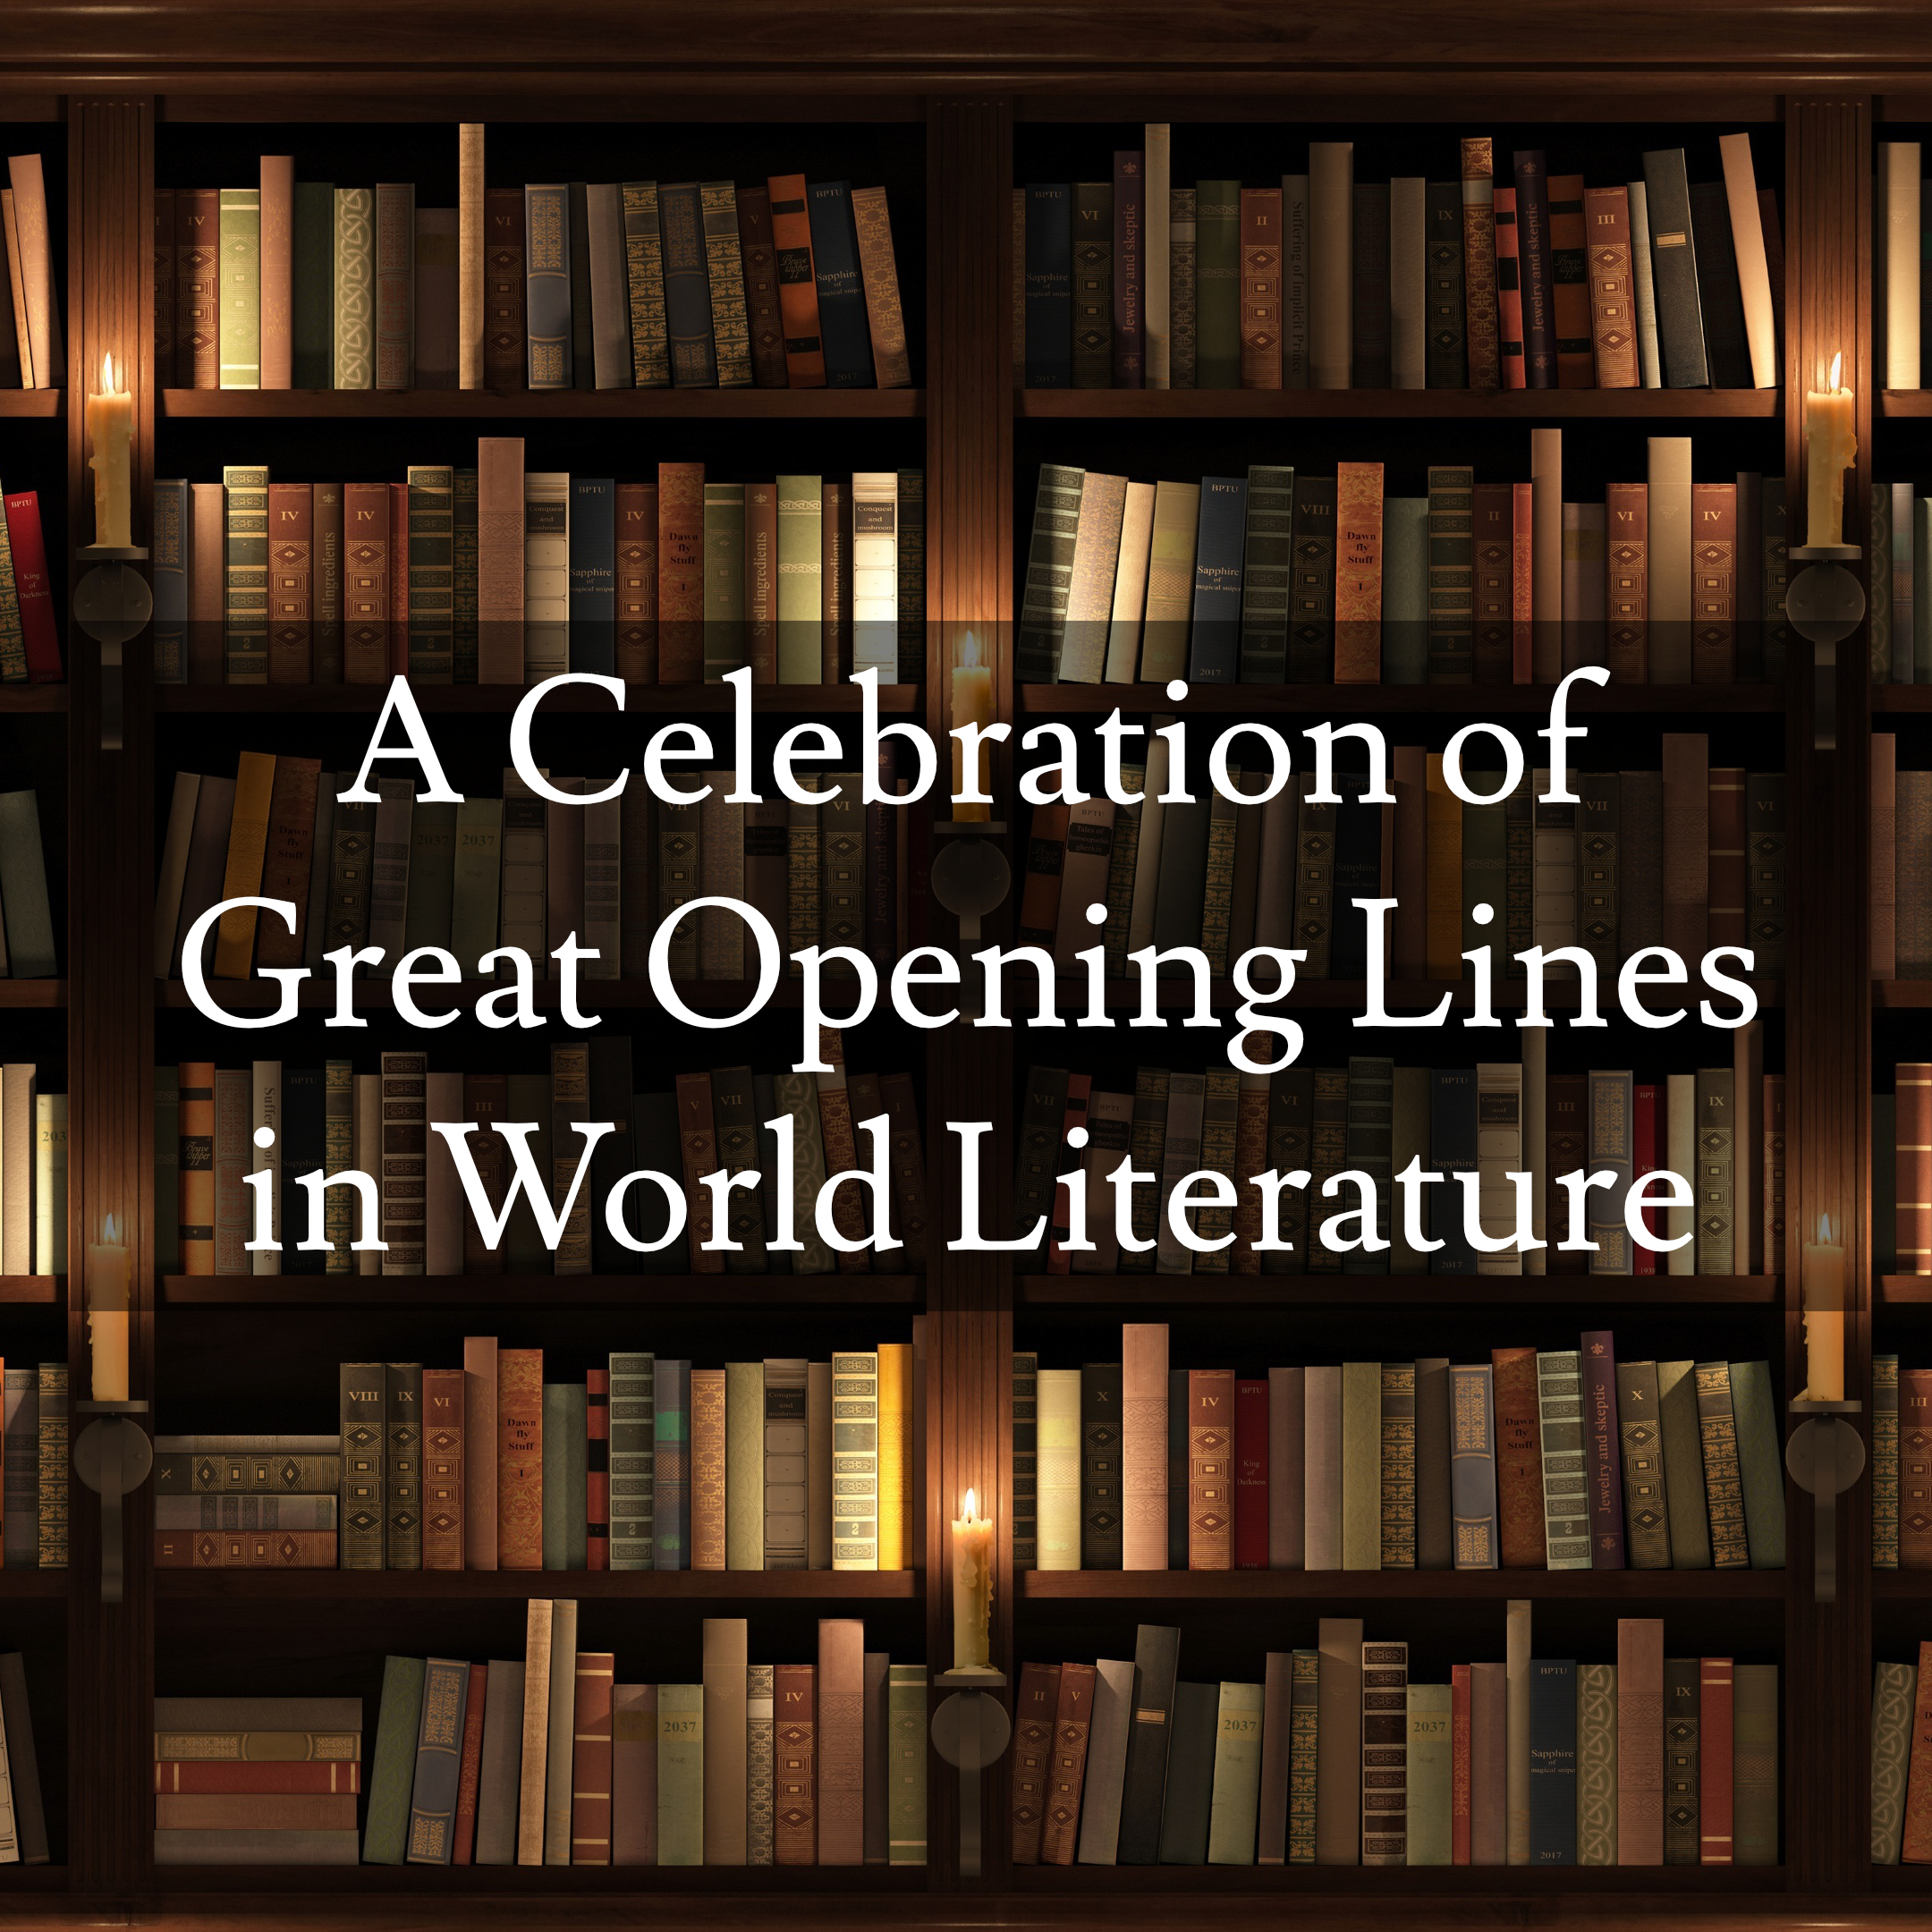 A Celebration of Great Opening Lines in World Literature